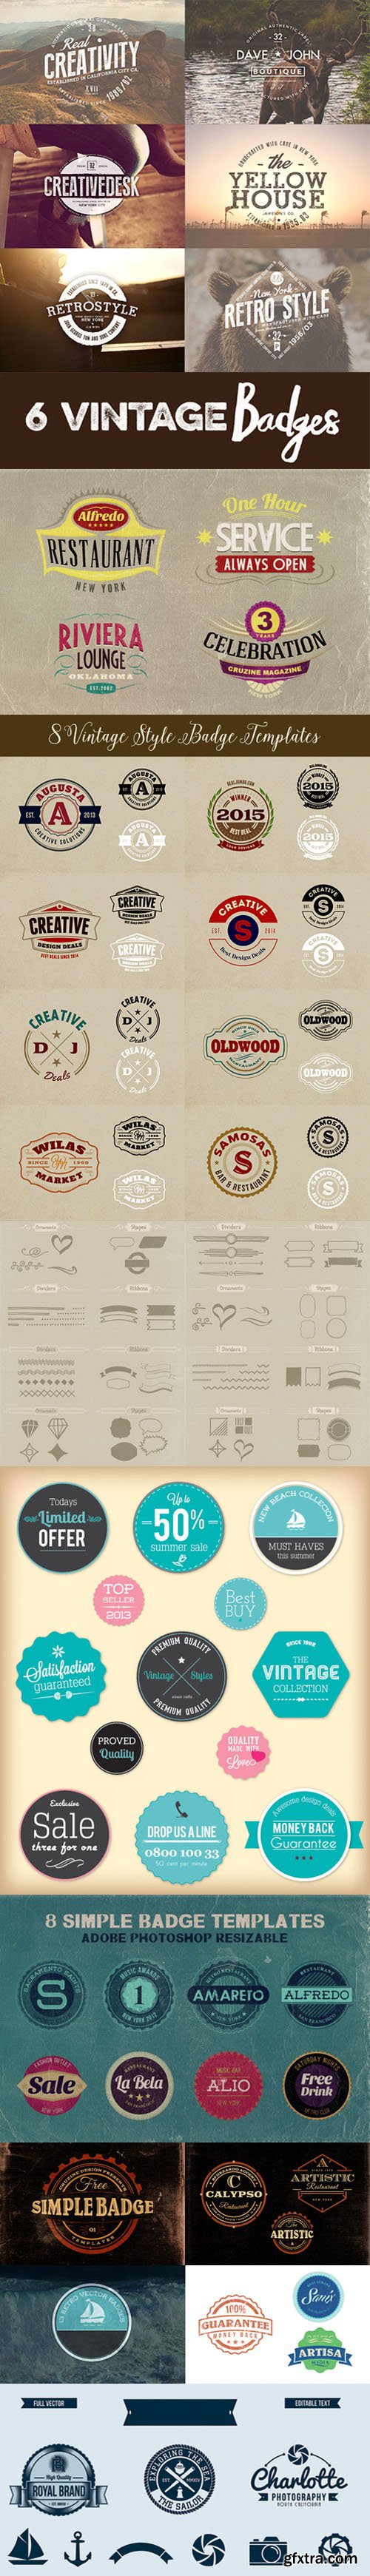 Retro Badges, Signs, Logos and Elements Templates Pack [PSD/AI/EPS]